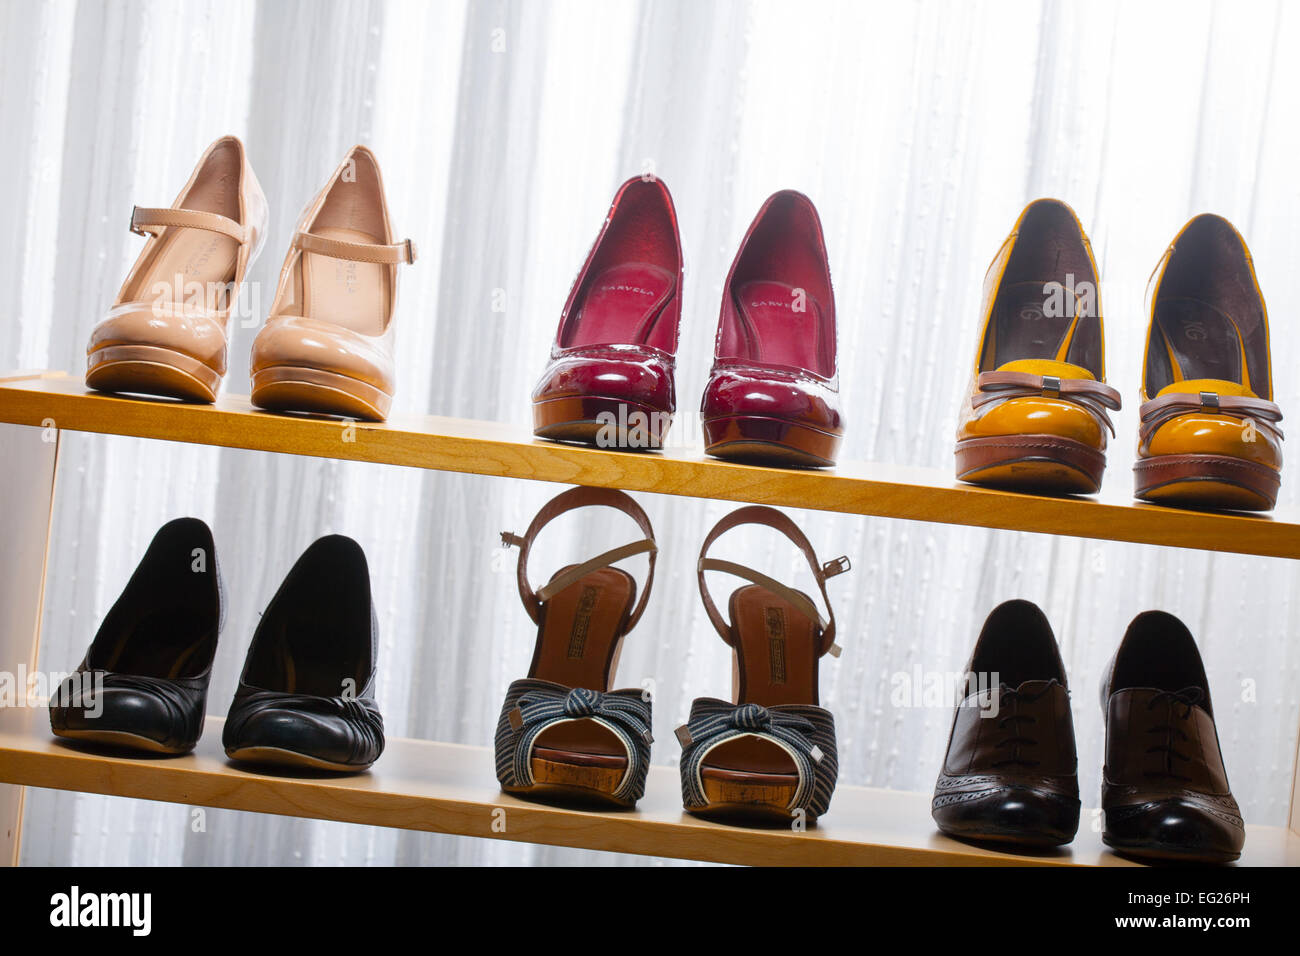 Various shoes on wooden shelves Stock Photo - Alamy